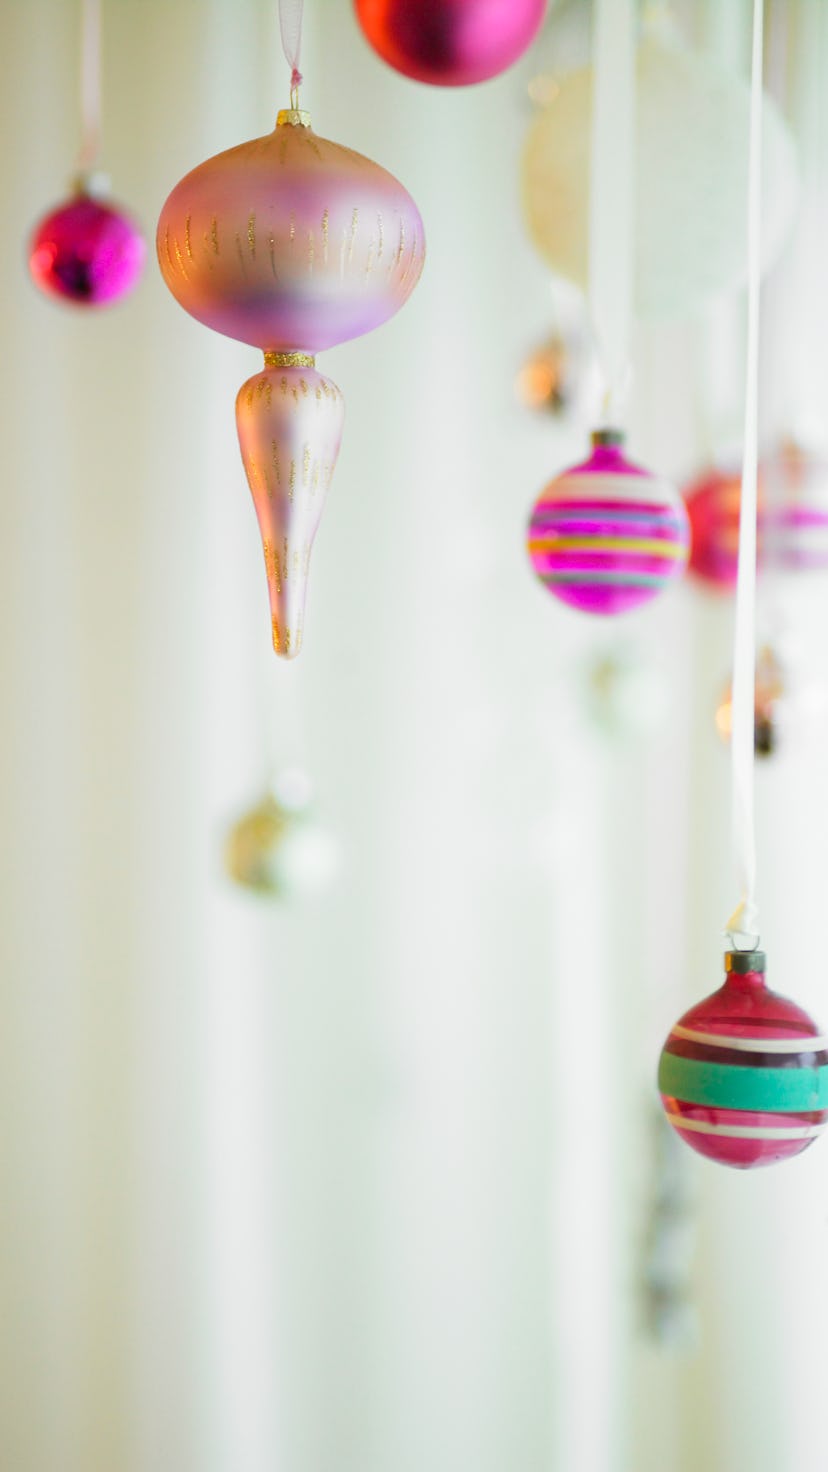 vintage glass ornaments hanging from ribbon